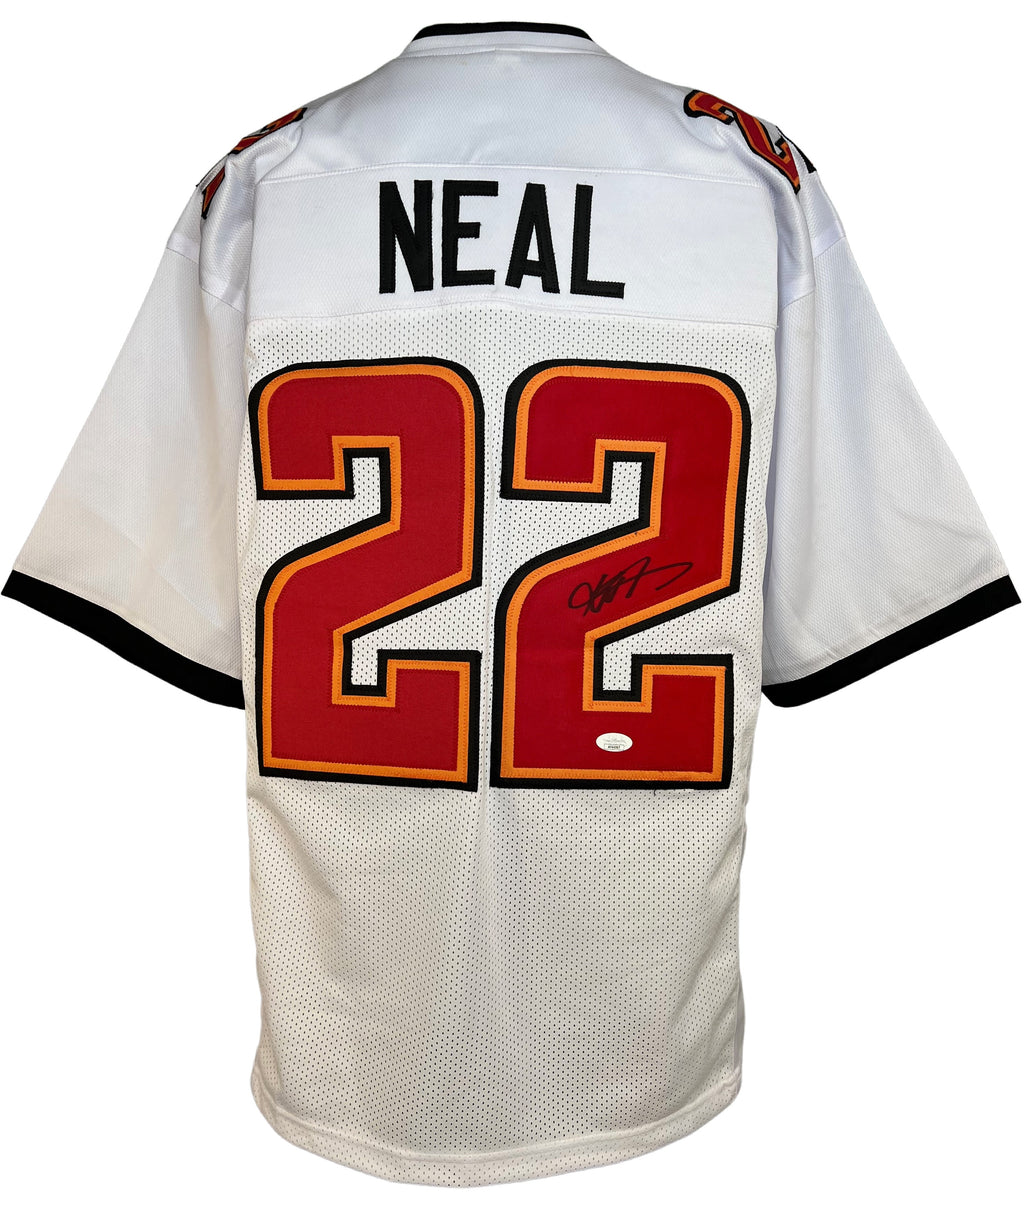 KEANU NEAL WHITE PRO STYLE CUSTOME STICHTED AUTOGRAPHED SIGNED JERSEY